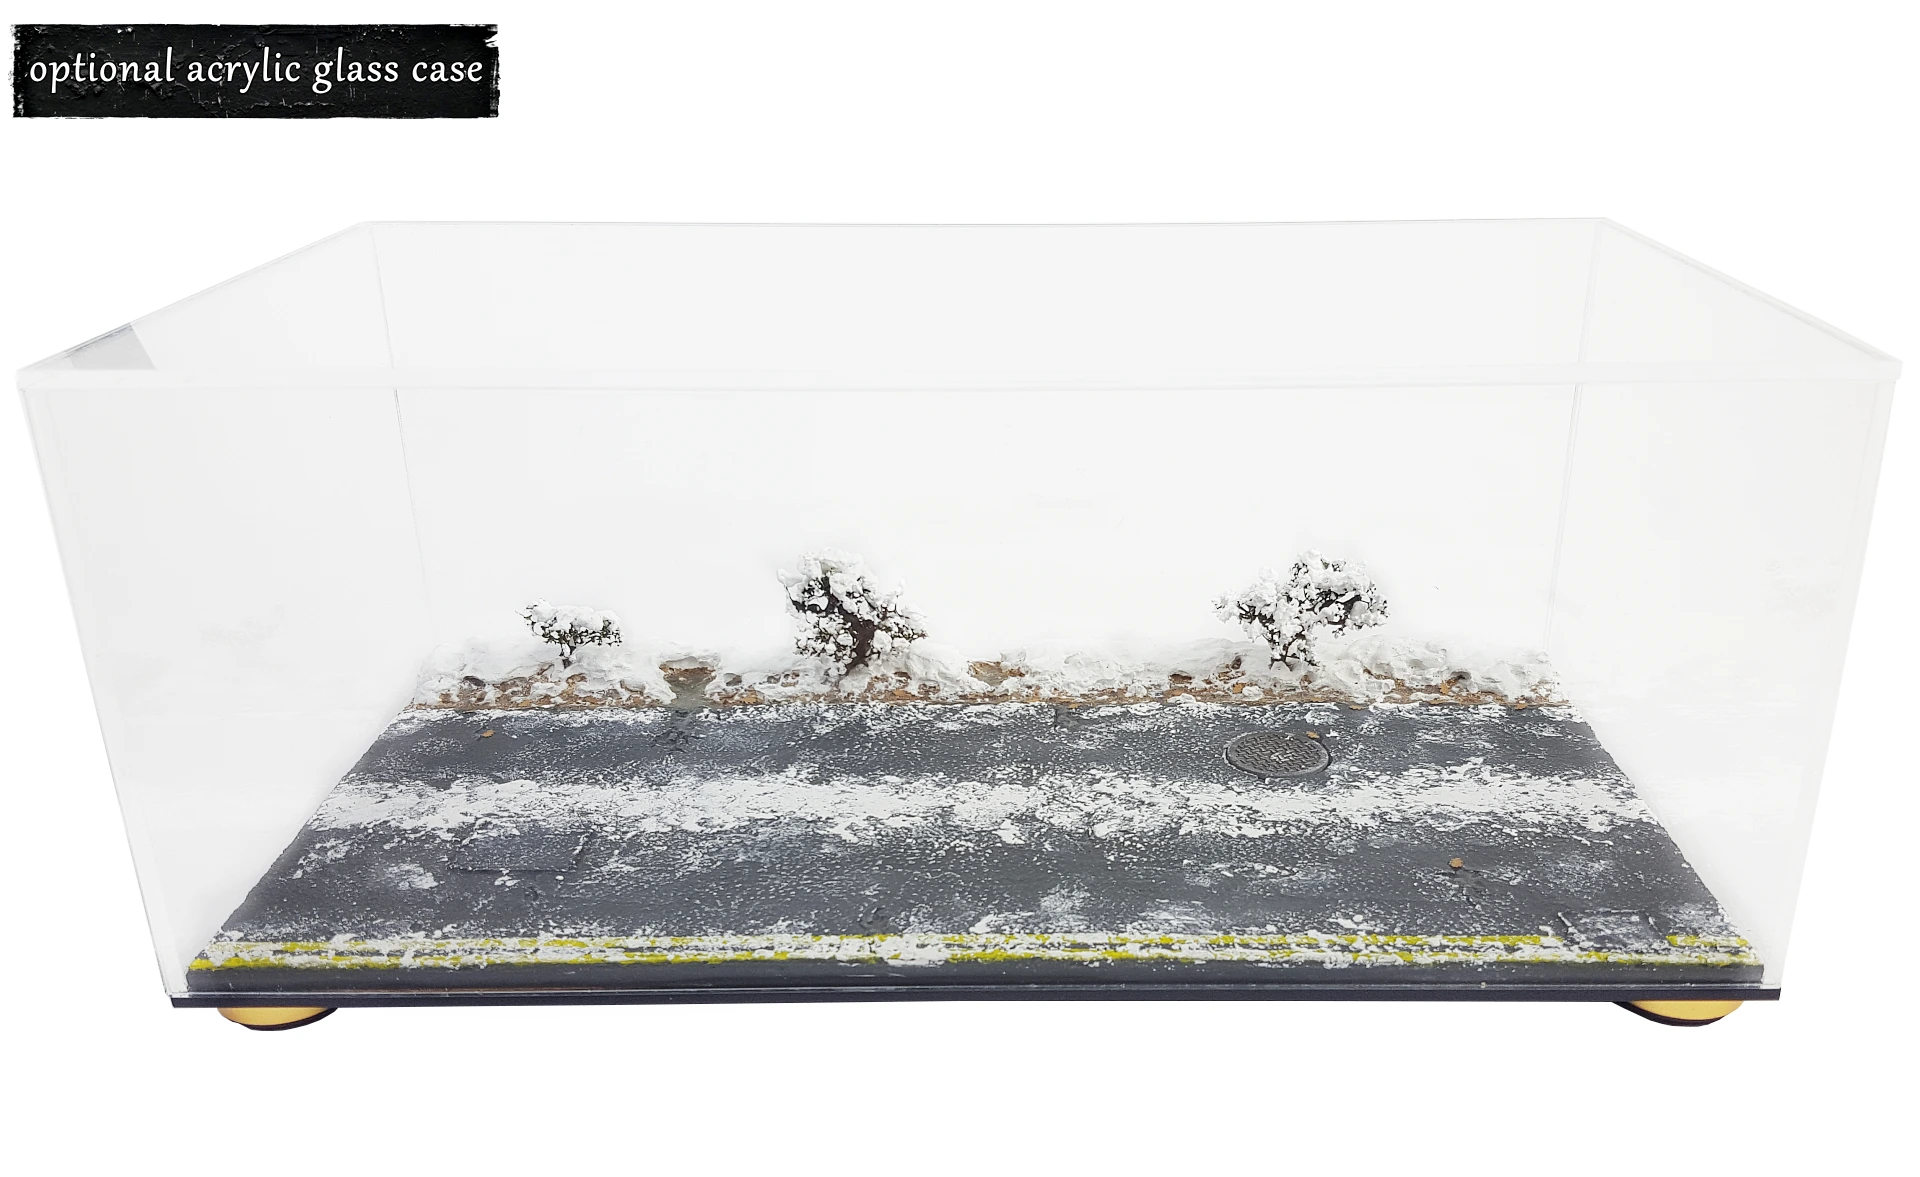 Snowy road diorama with transparent display case